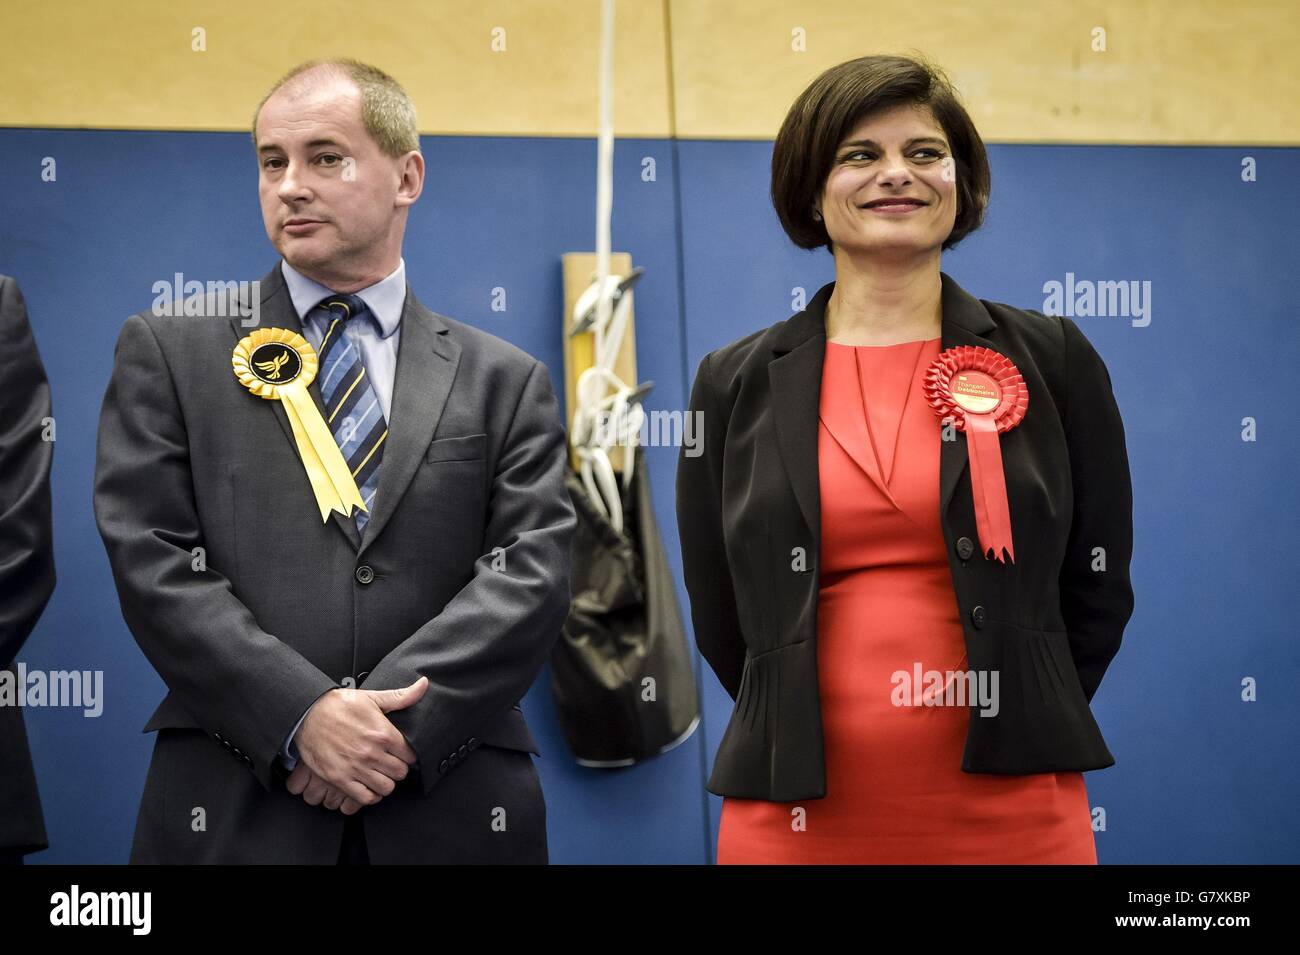 Liberal Democrat Prospective Parliamentary Candidate Stephen Williams stands next to his rival for the Bristol West seat as Labour MP Thangam Debbonaire wins the seat in the General Election 2015 at the City Academy Bristol. Stock Photo